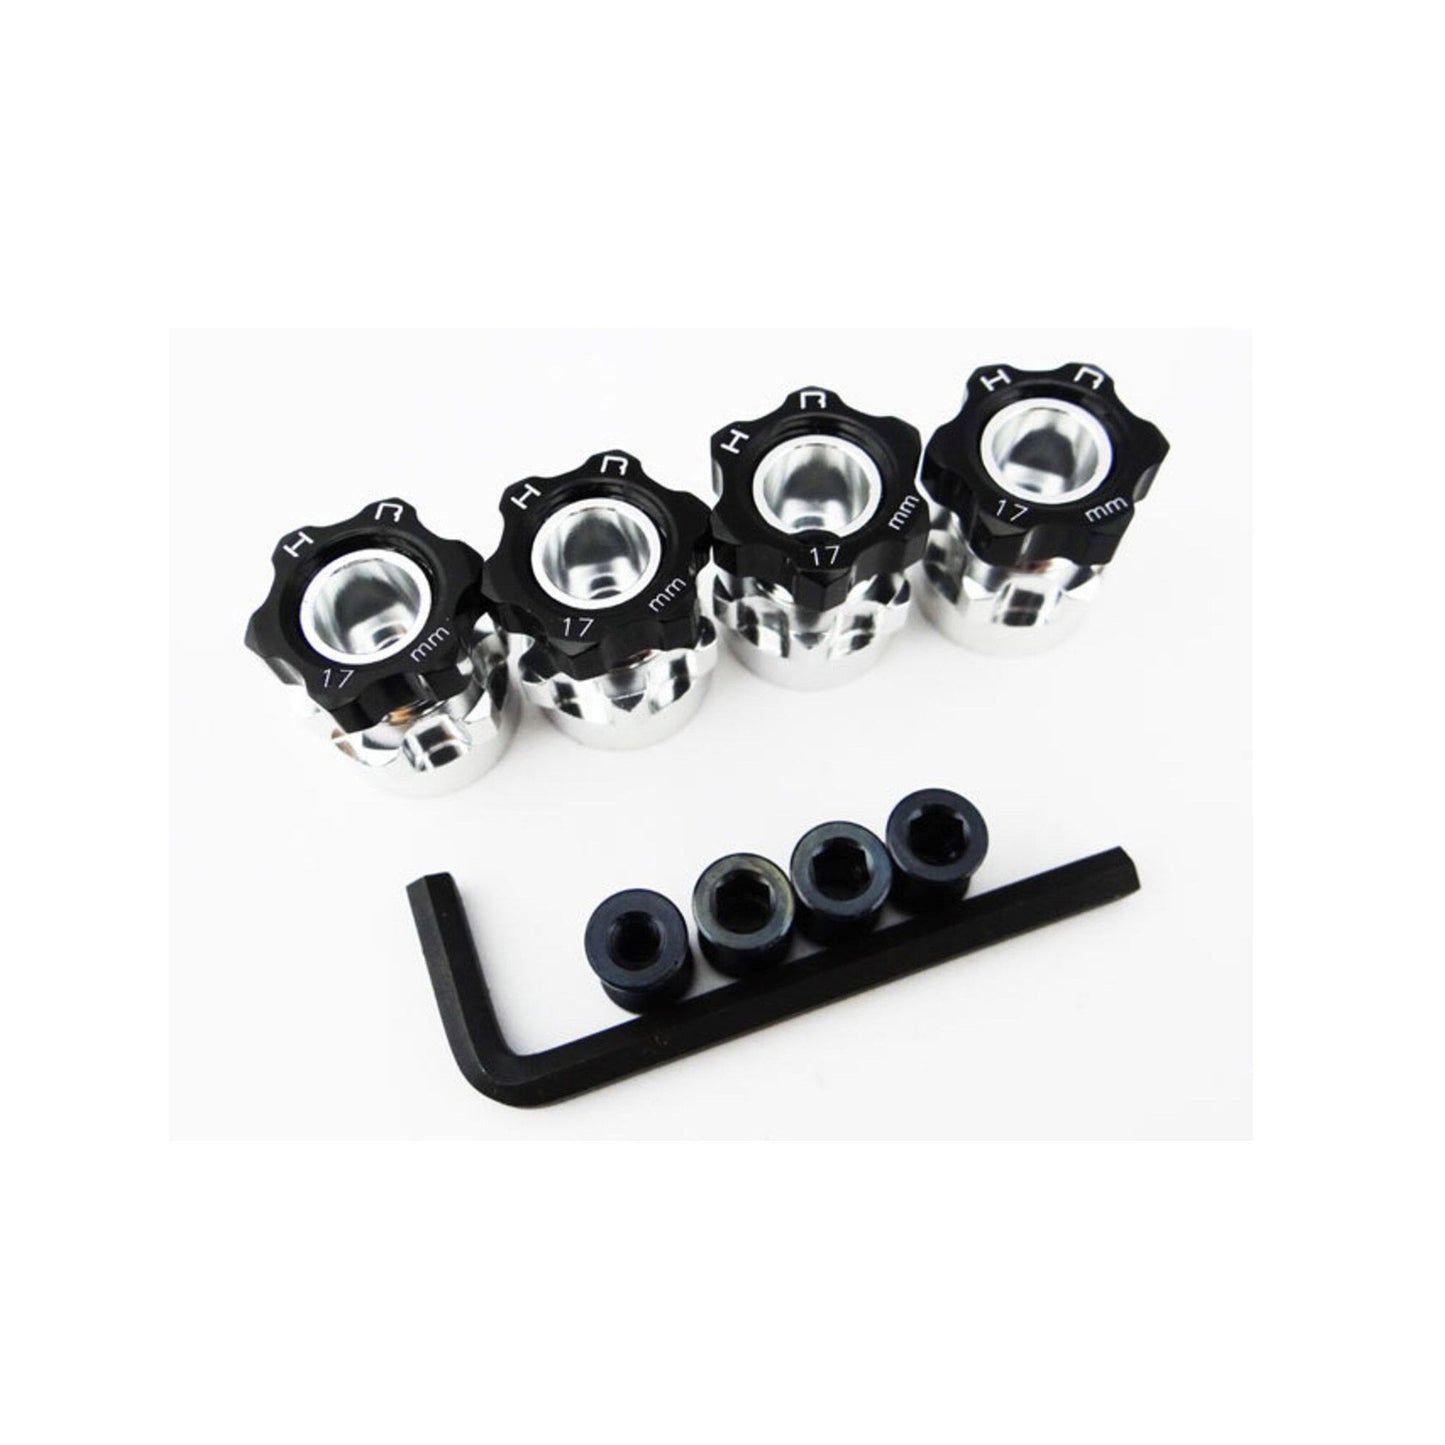 Hot Racing Hex Hub Adapters 12mm to 17mm